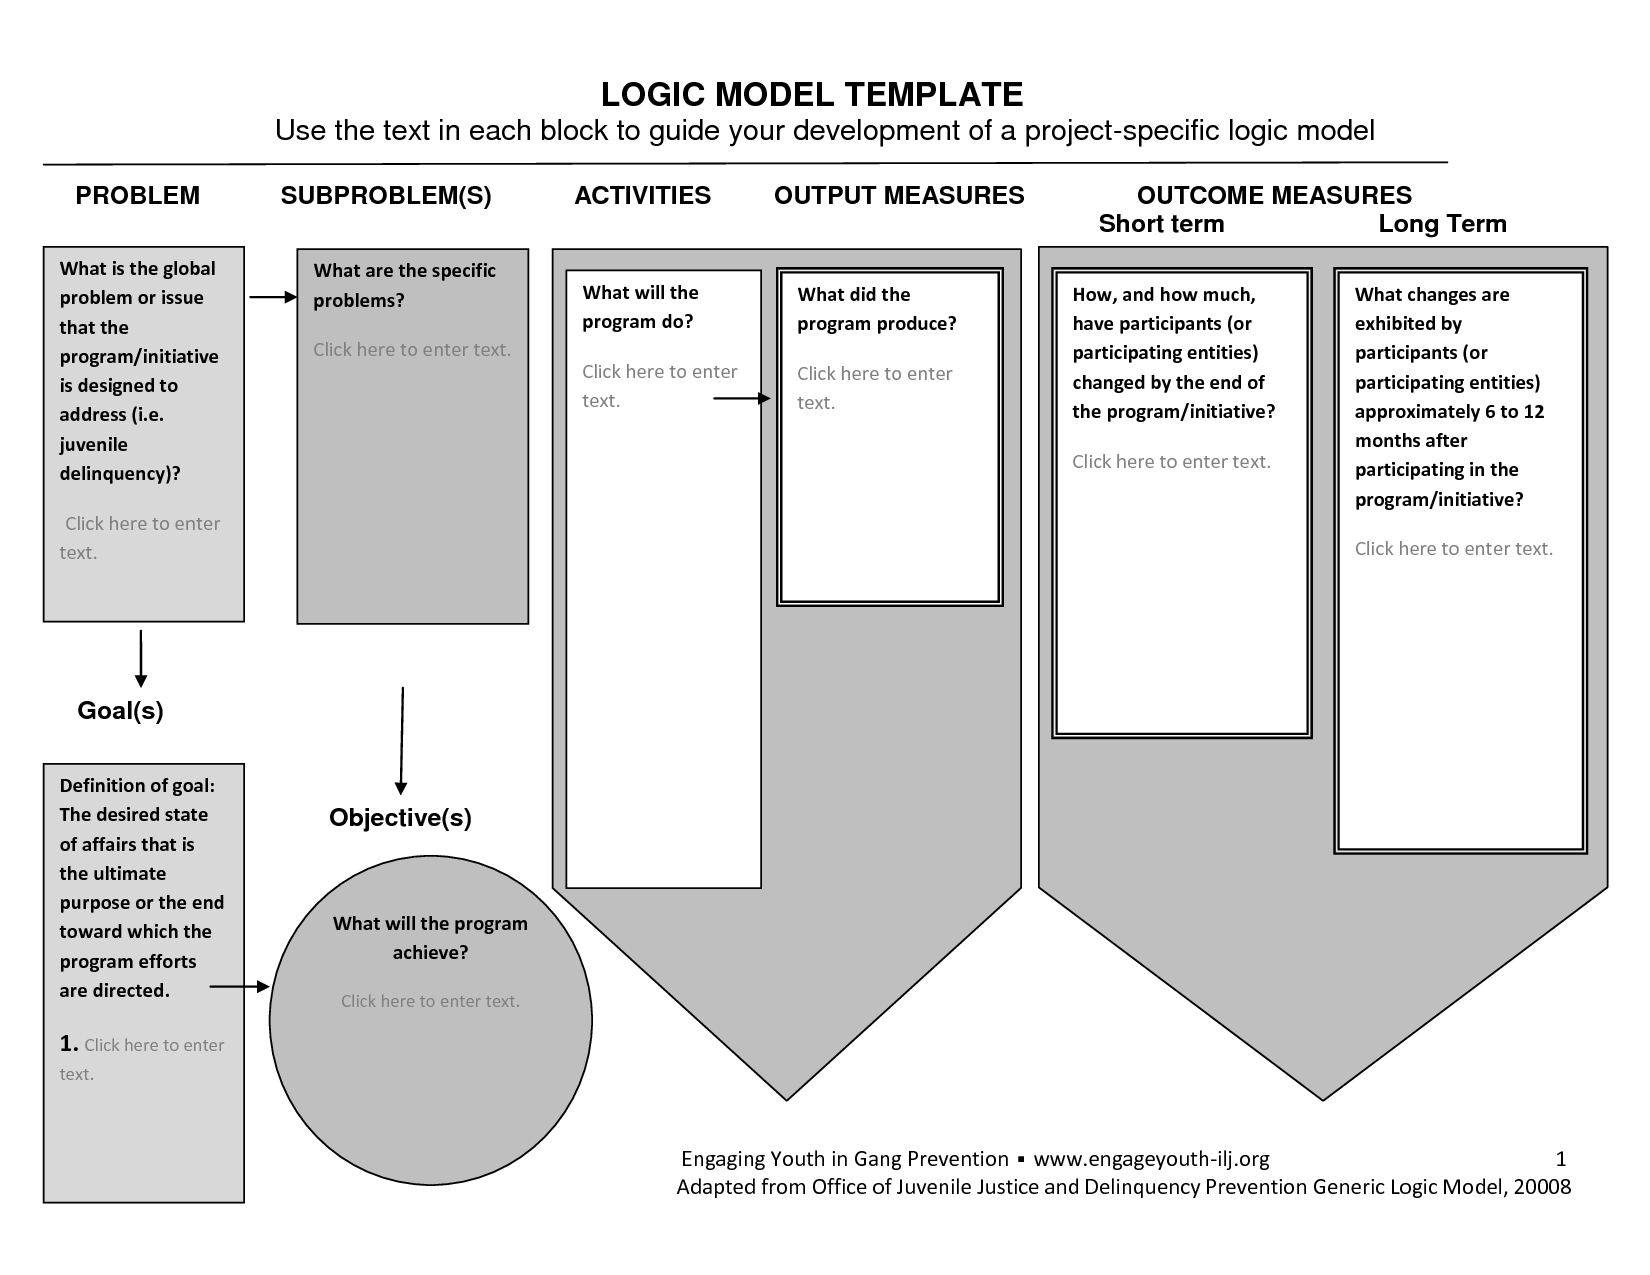 Pinjohn Gilmour On Team And Theory Of Change | Theory Of With Logic Model Template Microsoft Word